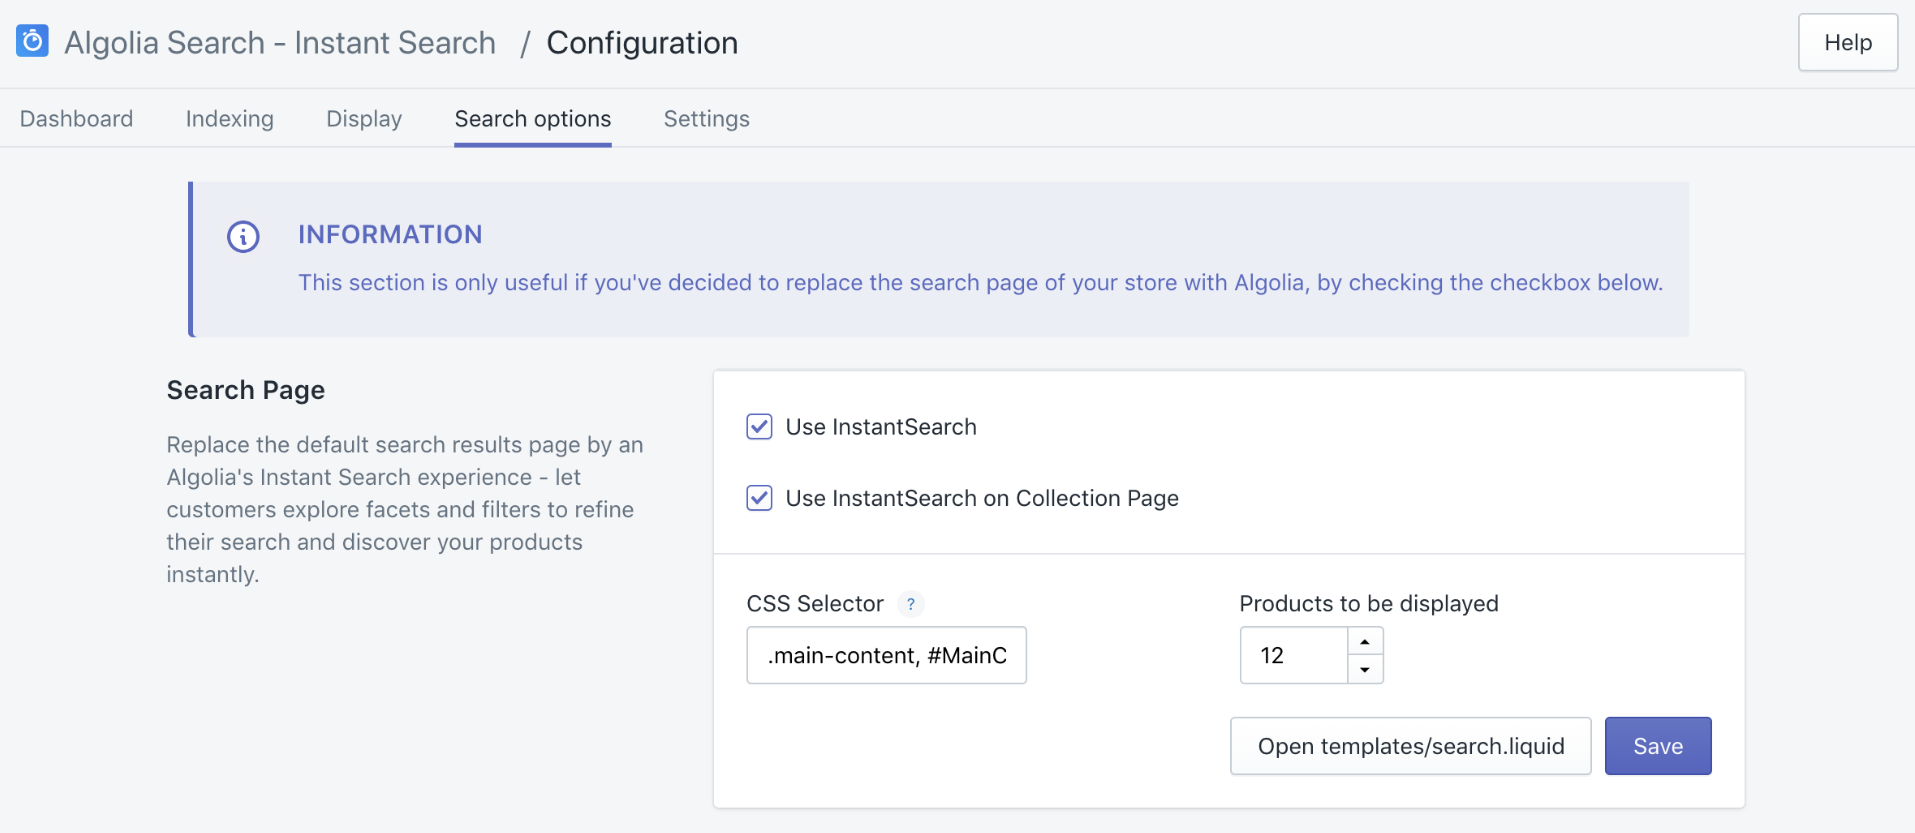 The search options screen in the Shopify admin